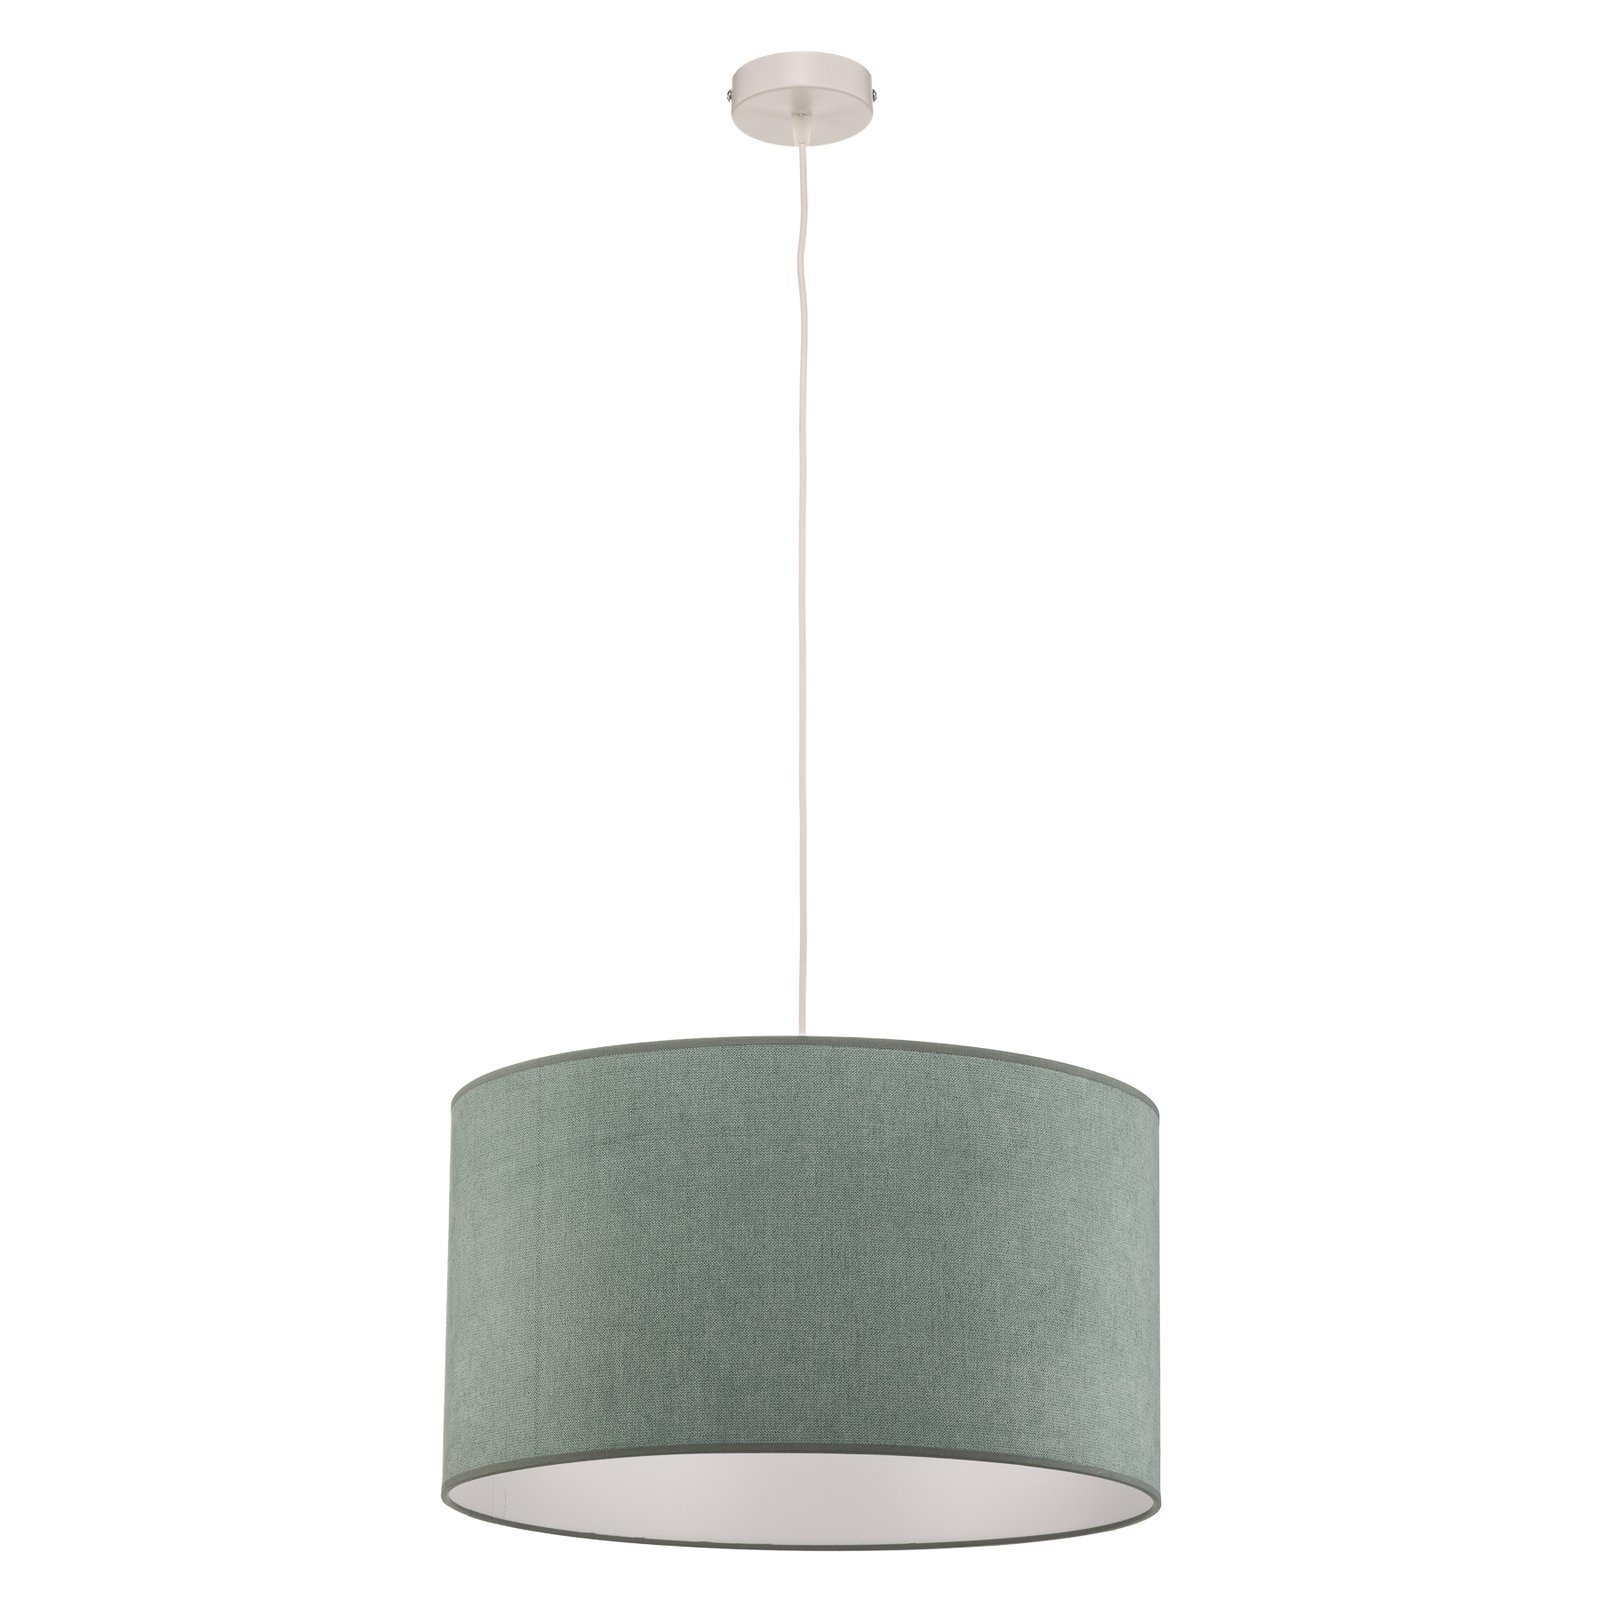 Pastell Roller hanging light in mint green